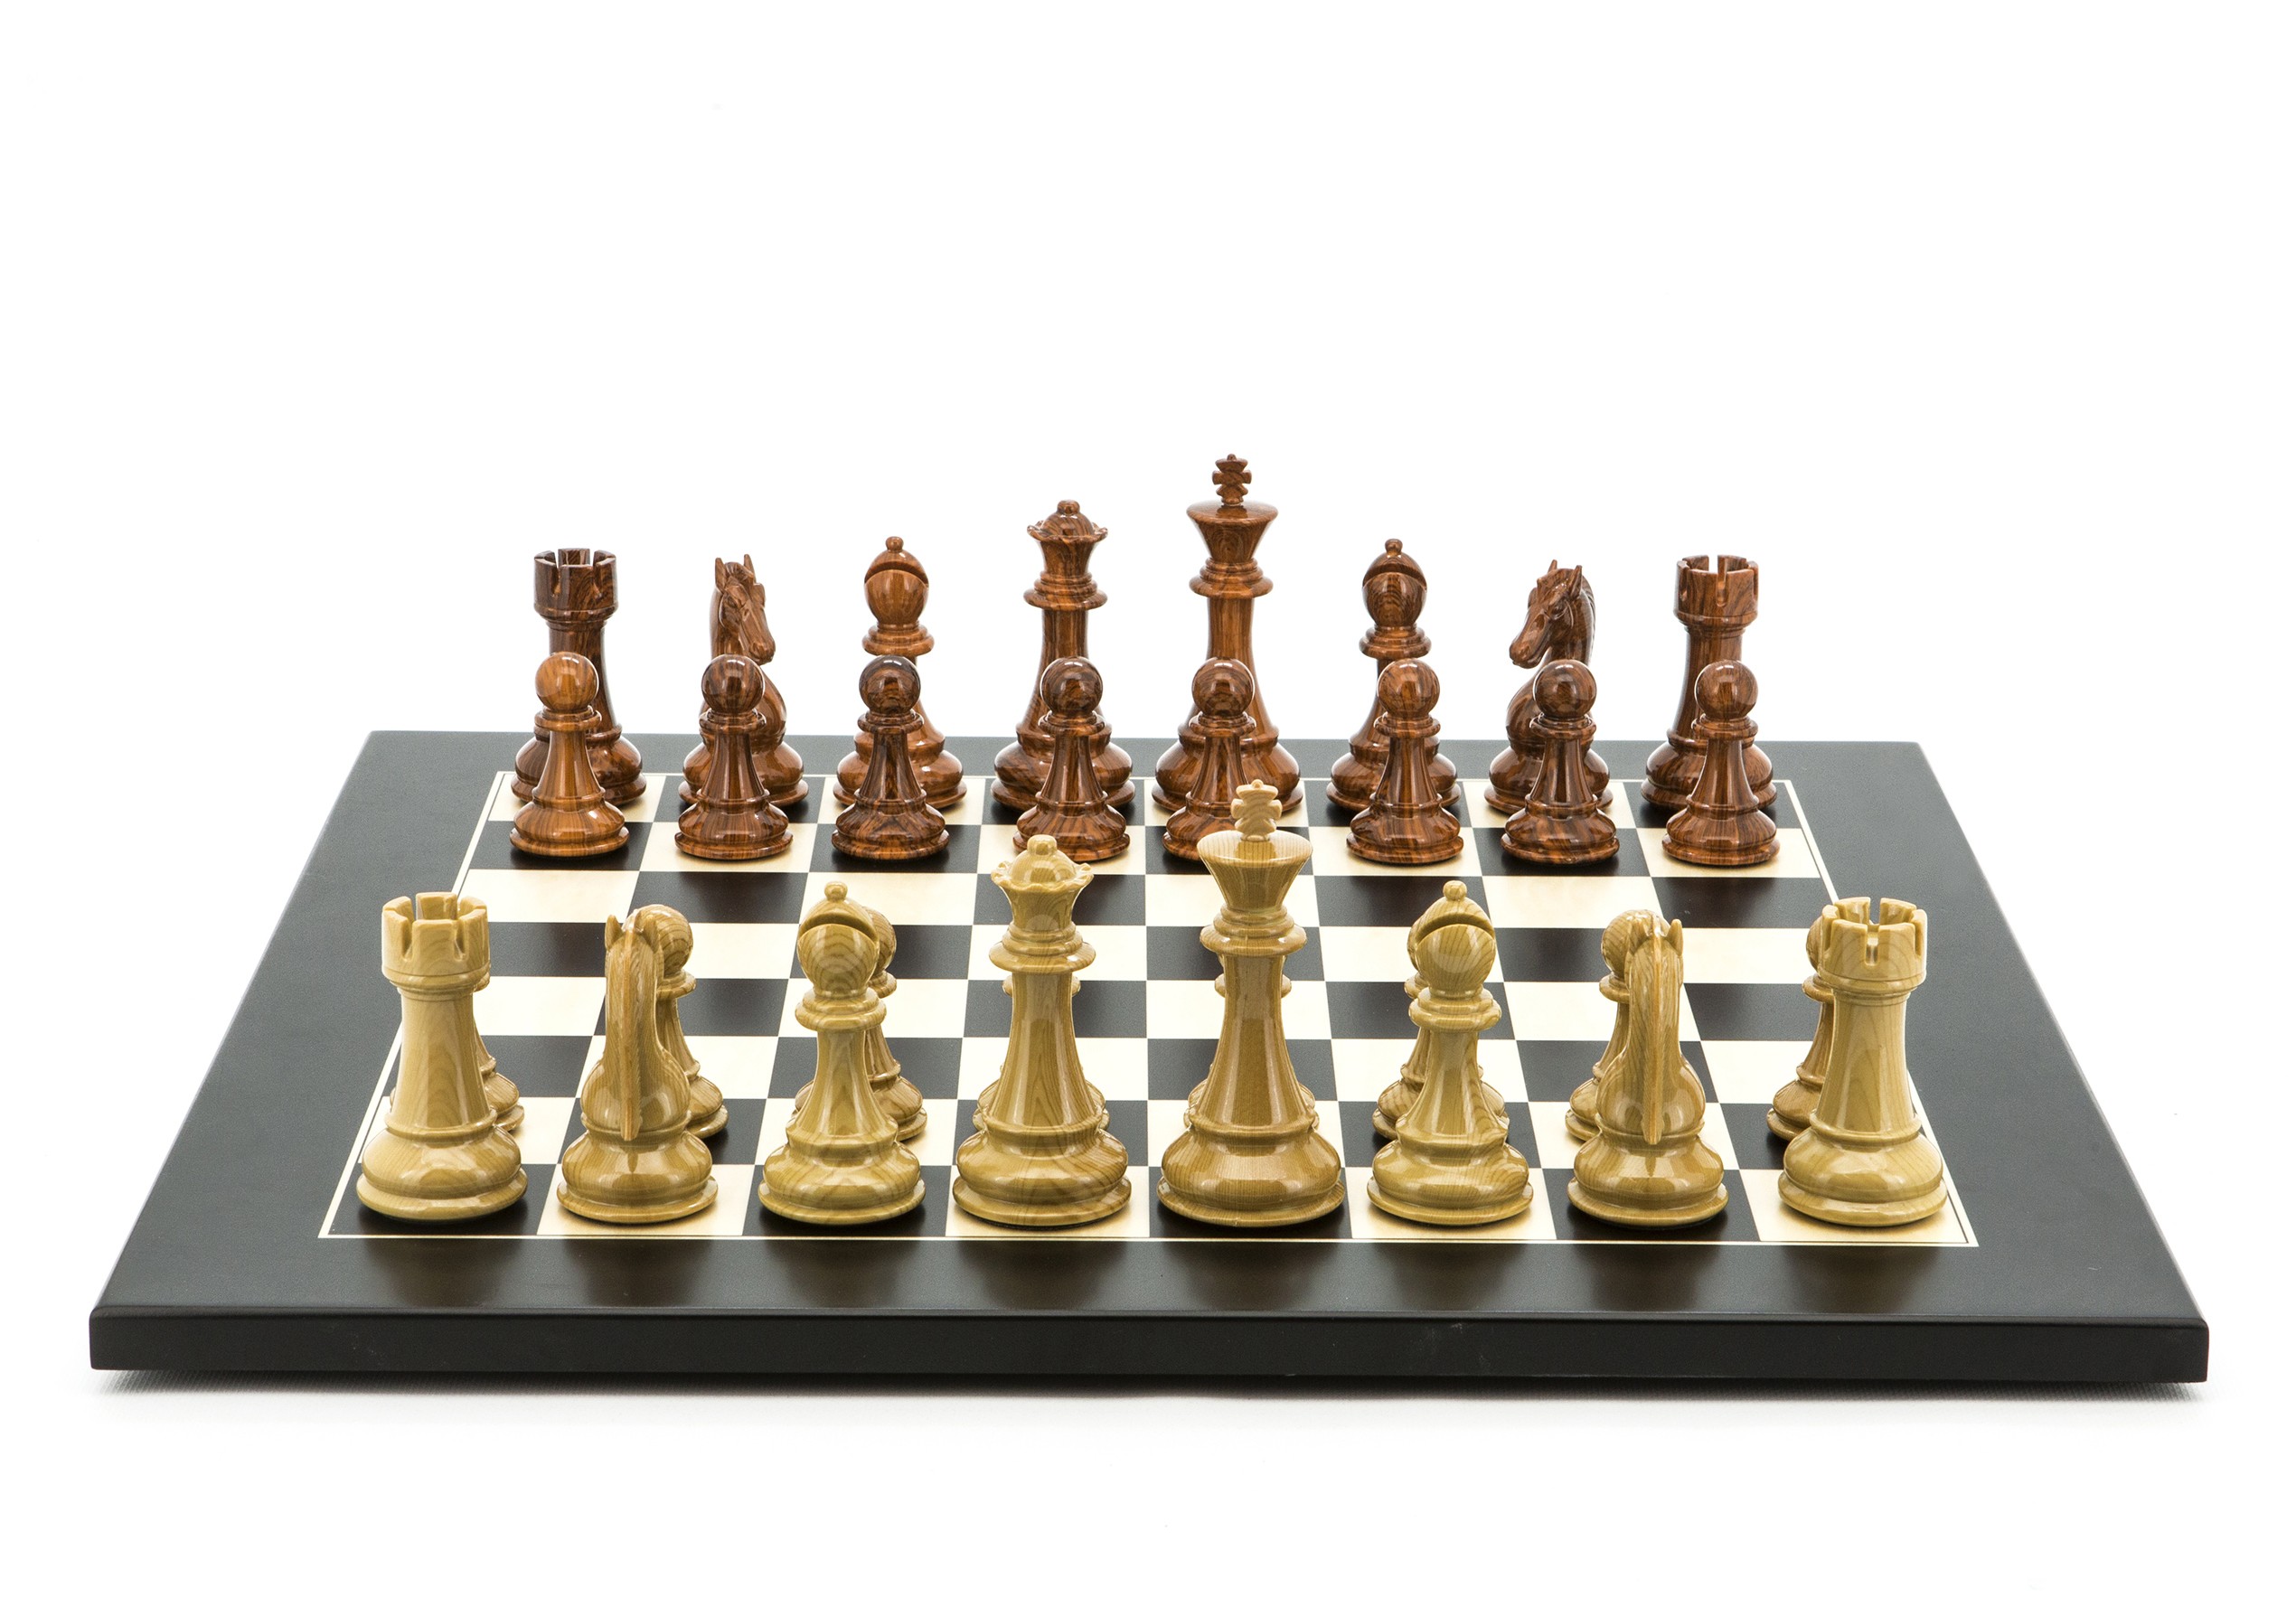 Dal Rossi Italy Chess Set Flat Black / Erable Board 50cm, Brown and Box Wood Grain Finish Chess Pieces 110mm